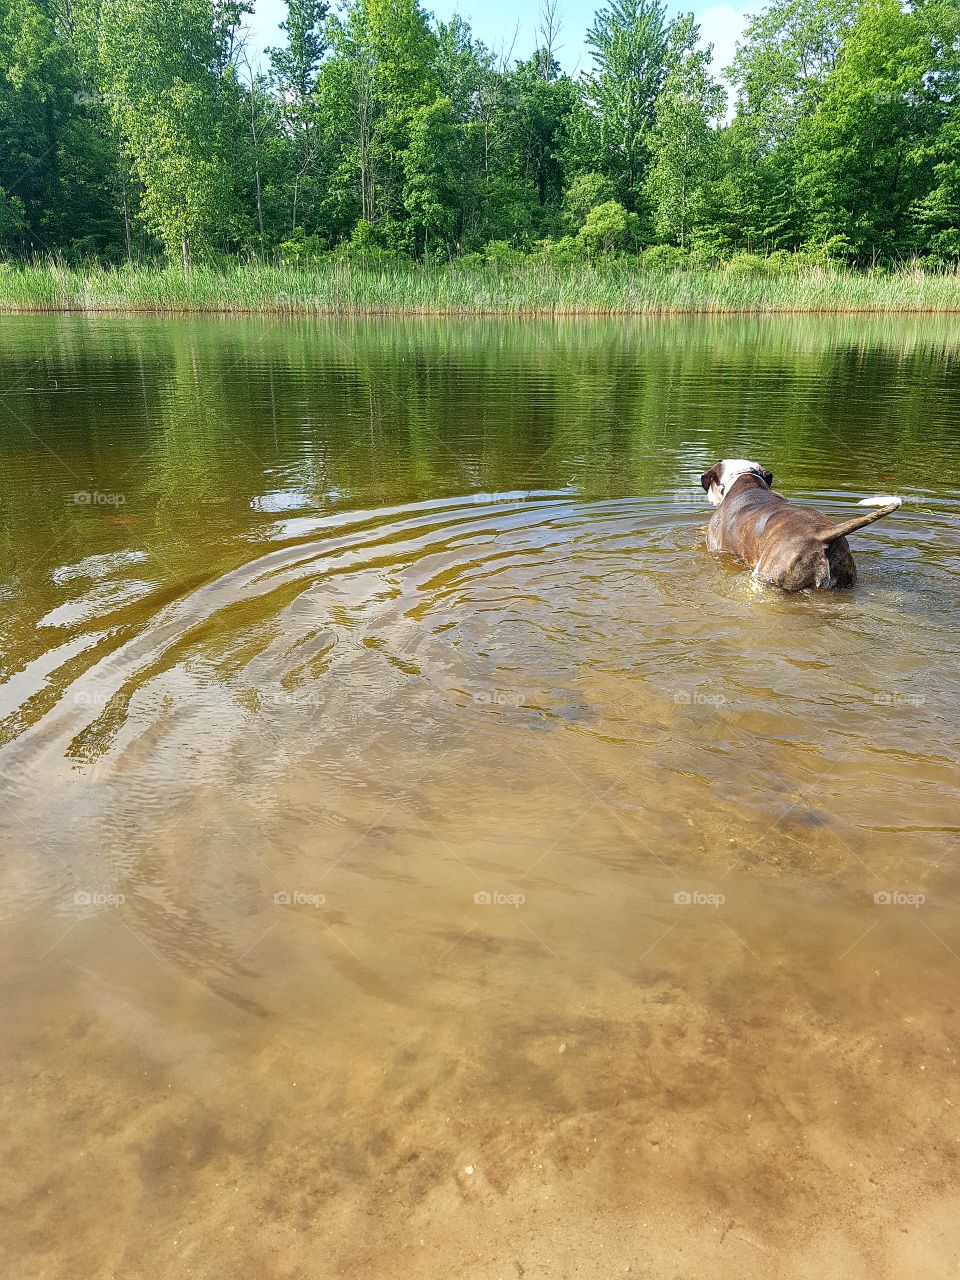 A dog swims in a pond in the country.